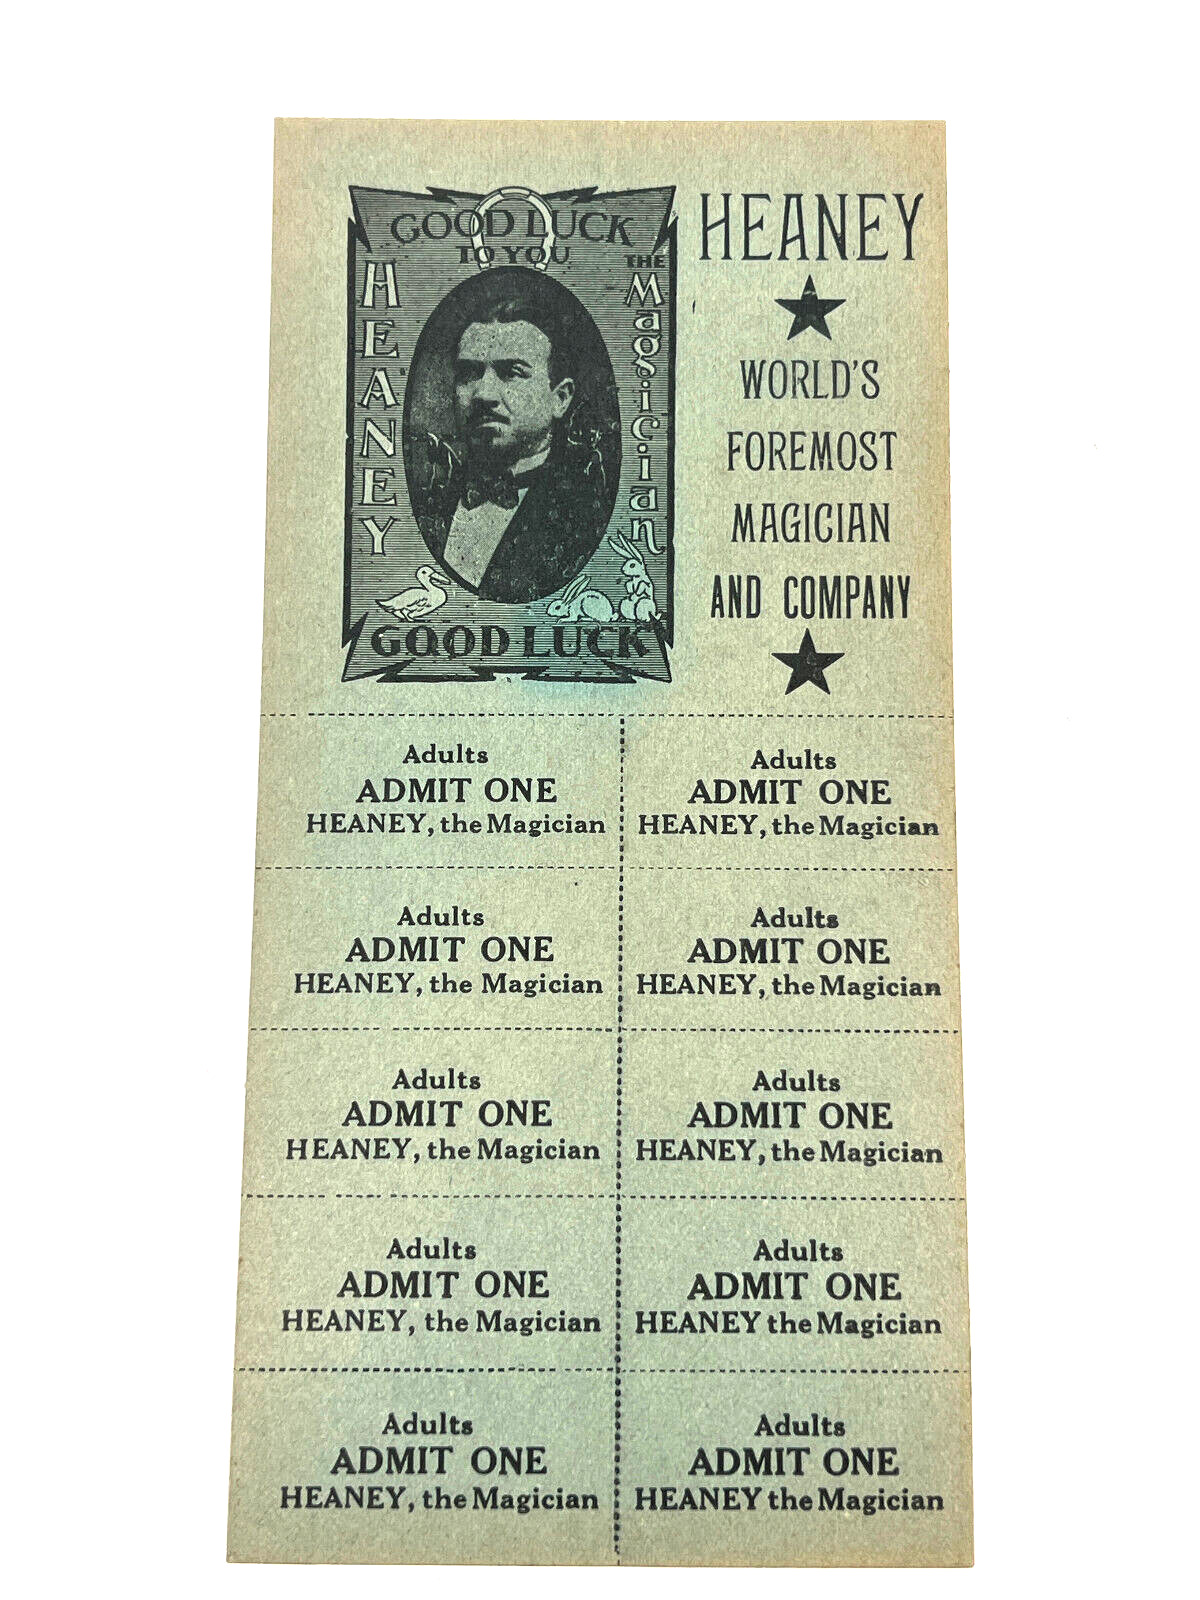 Antique 1930's Heaney Magician Unused Ticket Sheet GOOD LUCK advertising sign